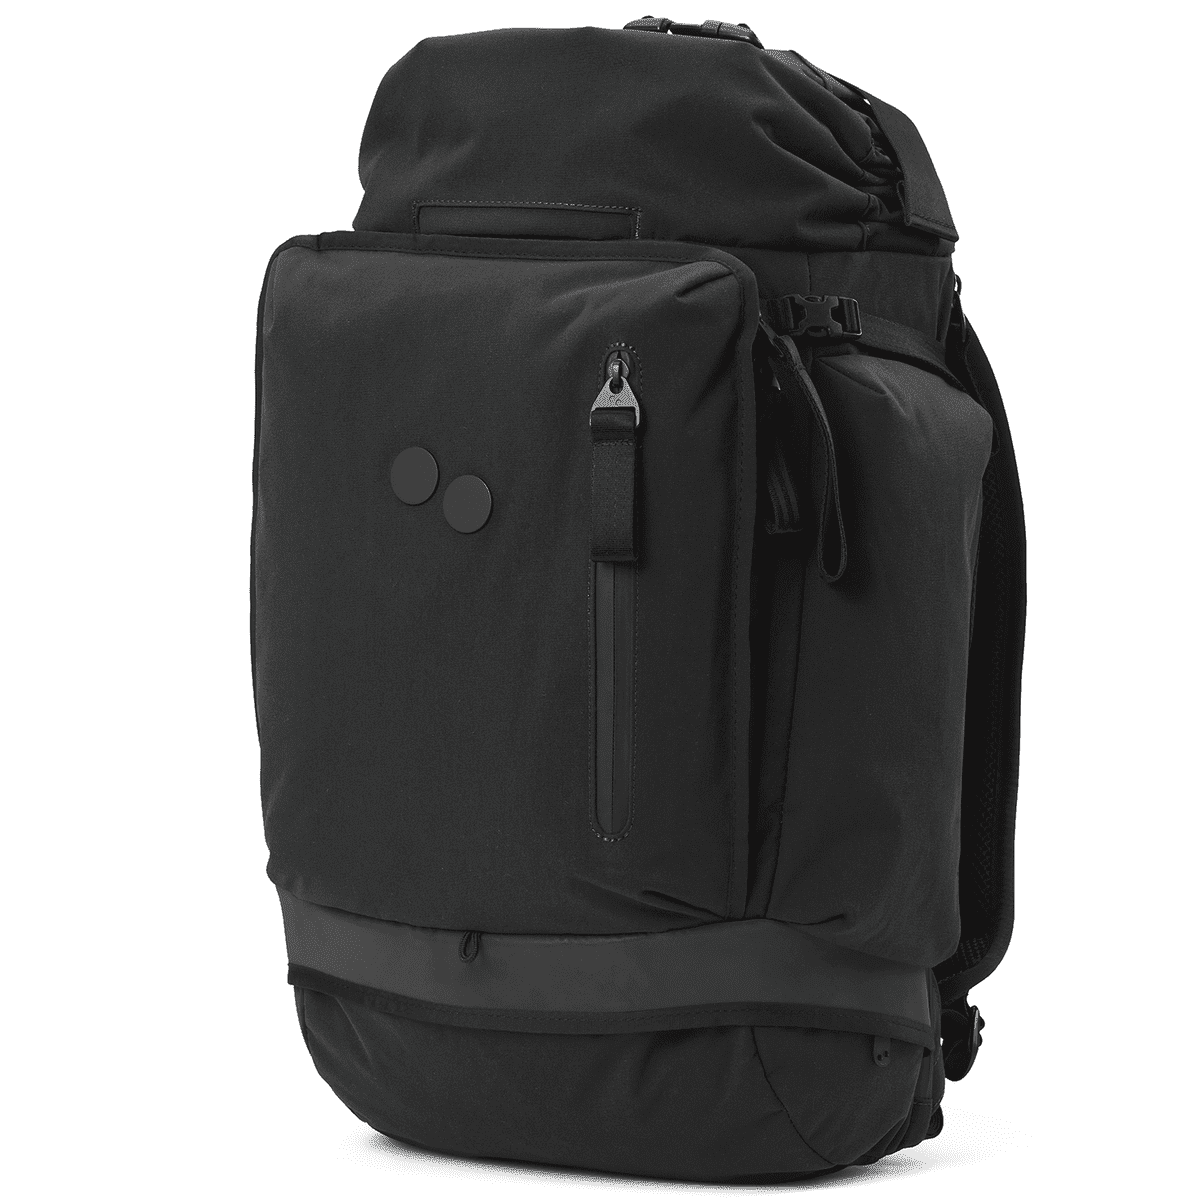 KOMUT M backpack, made from recycled materials